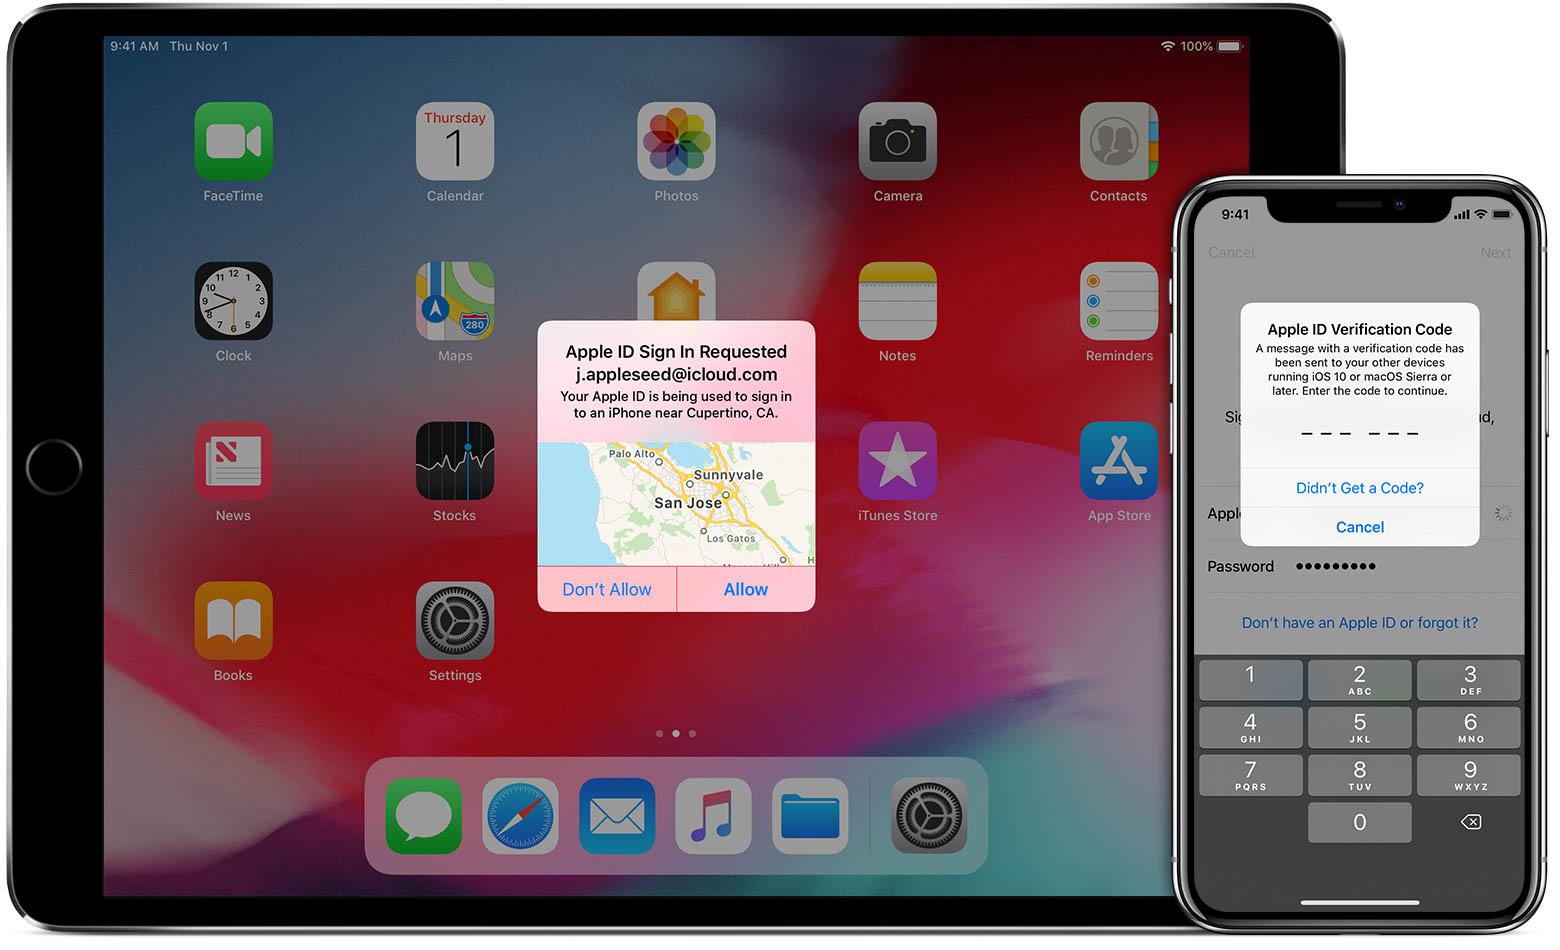 Multi-factor authentication is recommended as additional defense against hackers. In the case of Apple devices, the company offers two-factor authentication (2FA). Image: Apple.